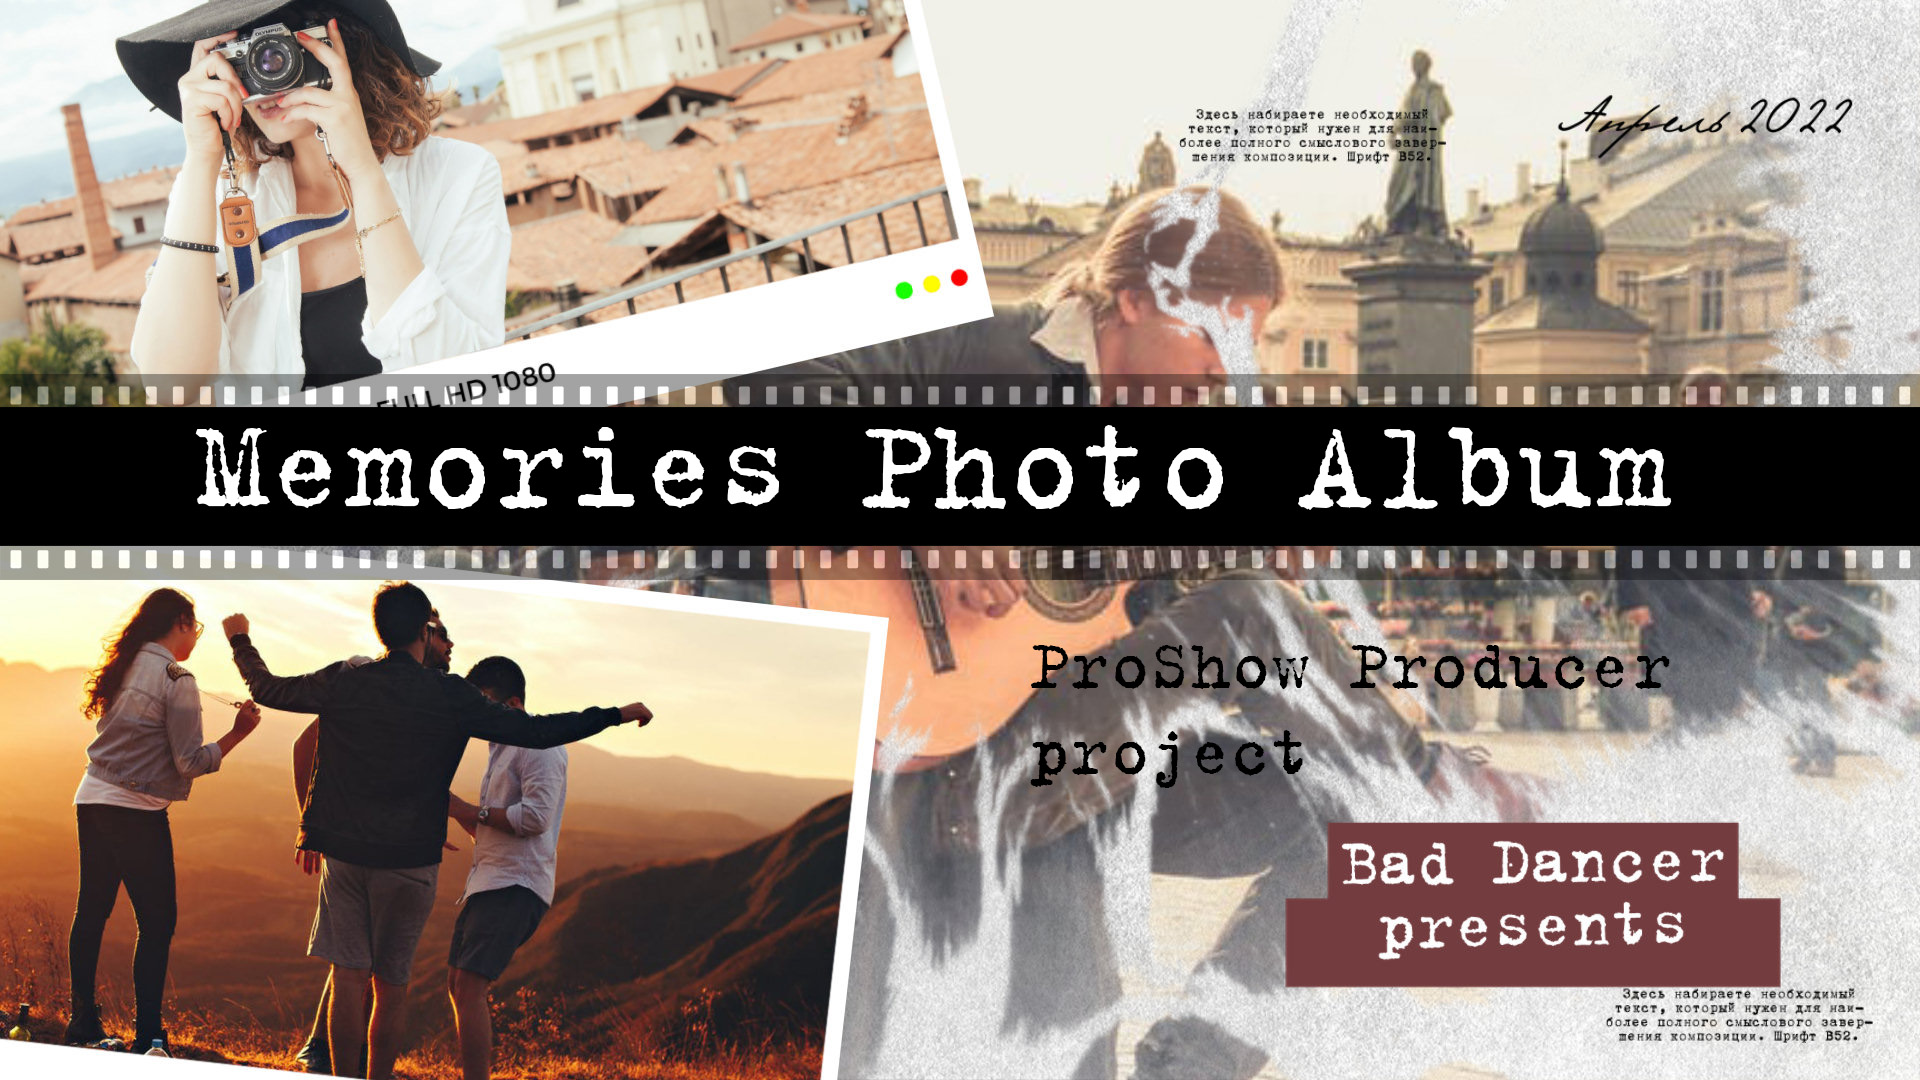 Free Proshow Producer project Memories Photo Album ID 01062022.mp4